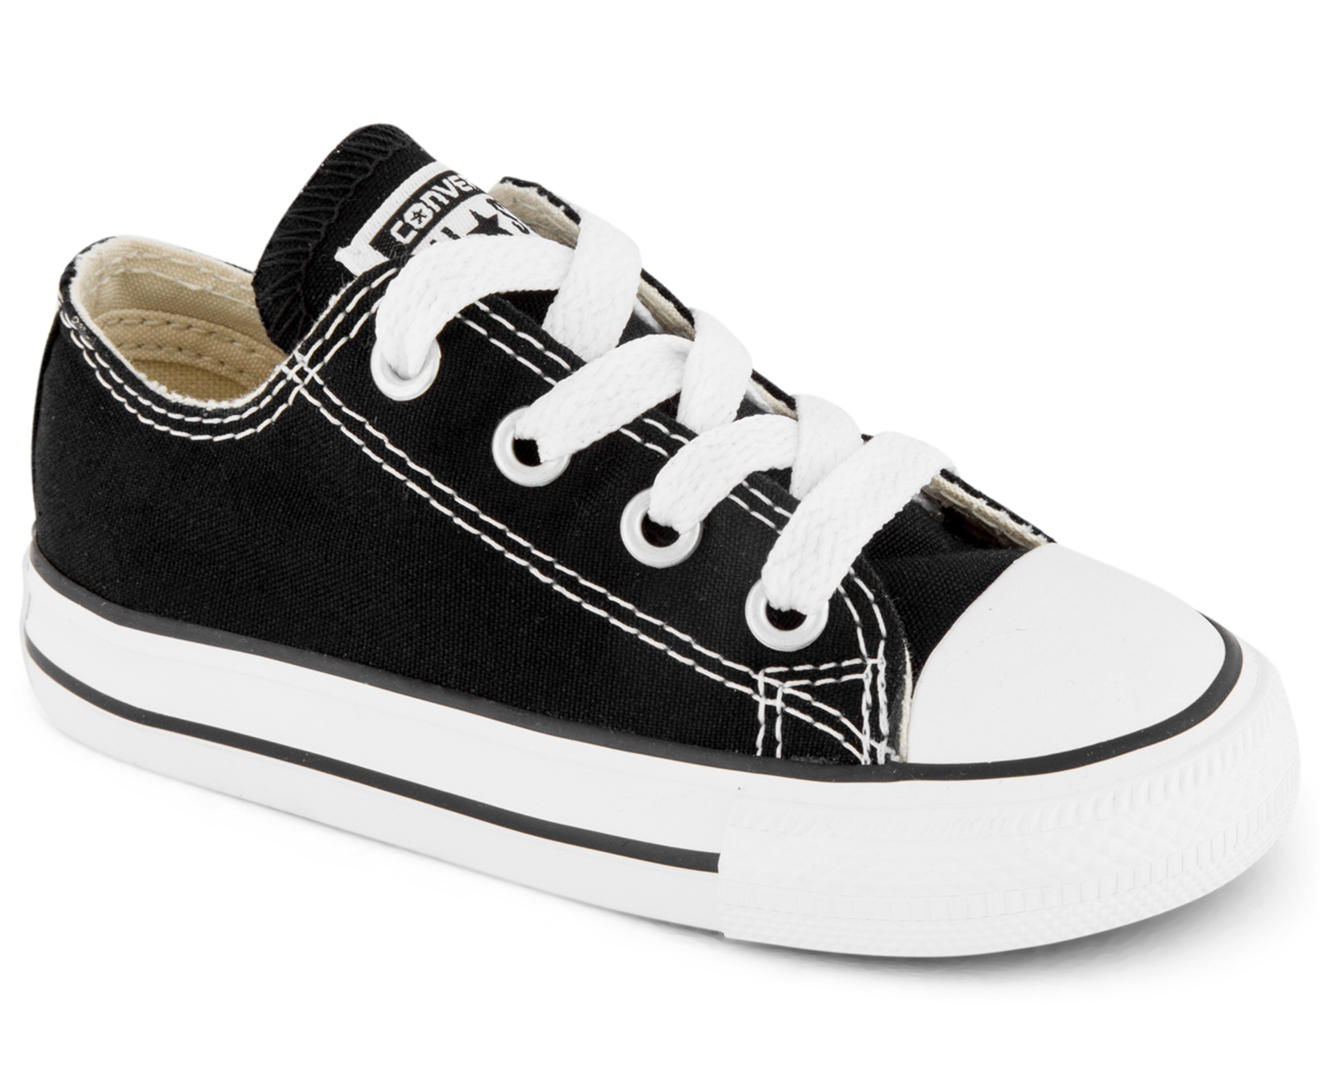 Converse Toddler Chuck Taylor All Star Low Top Sneakers - Black | Catch ...